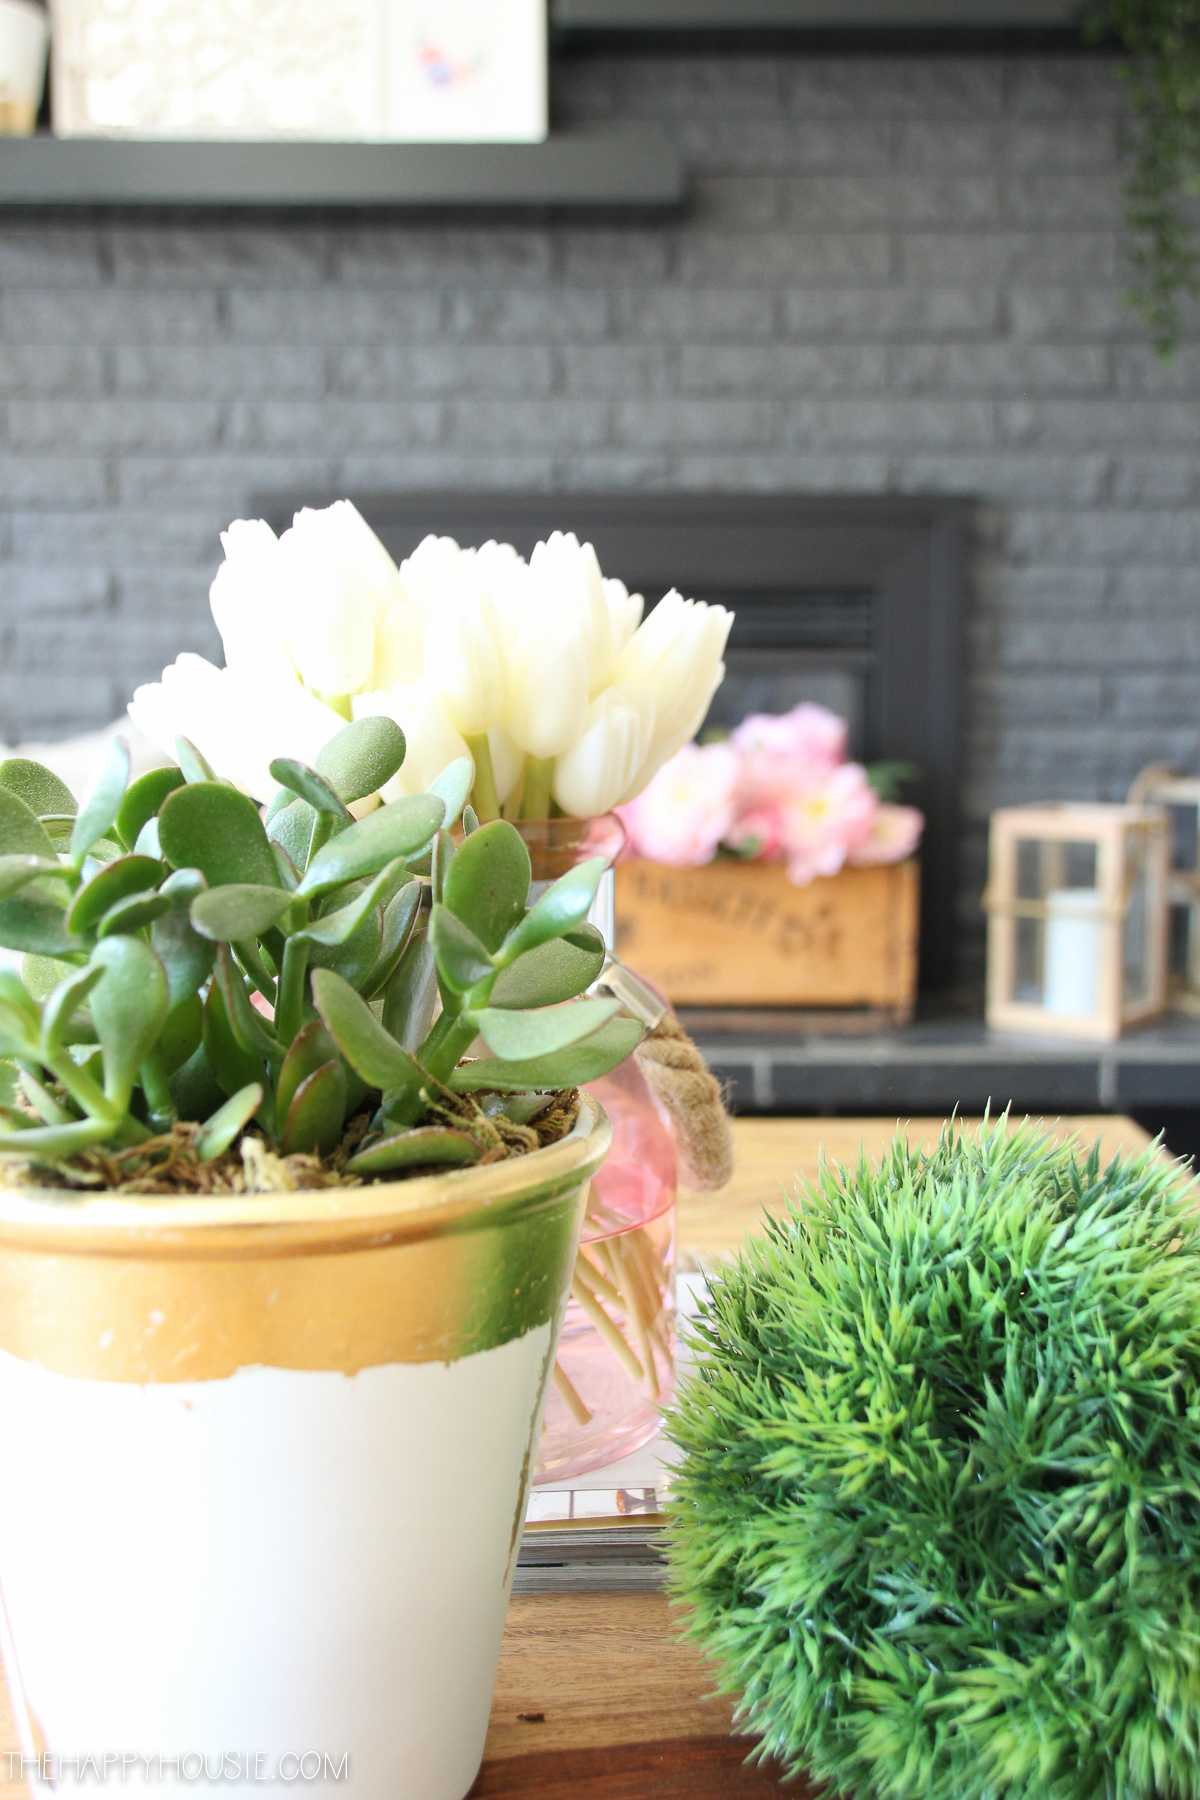 Up close picture of the white tulips and potted plants on the table in the living room.